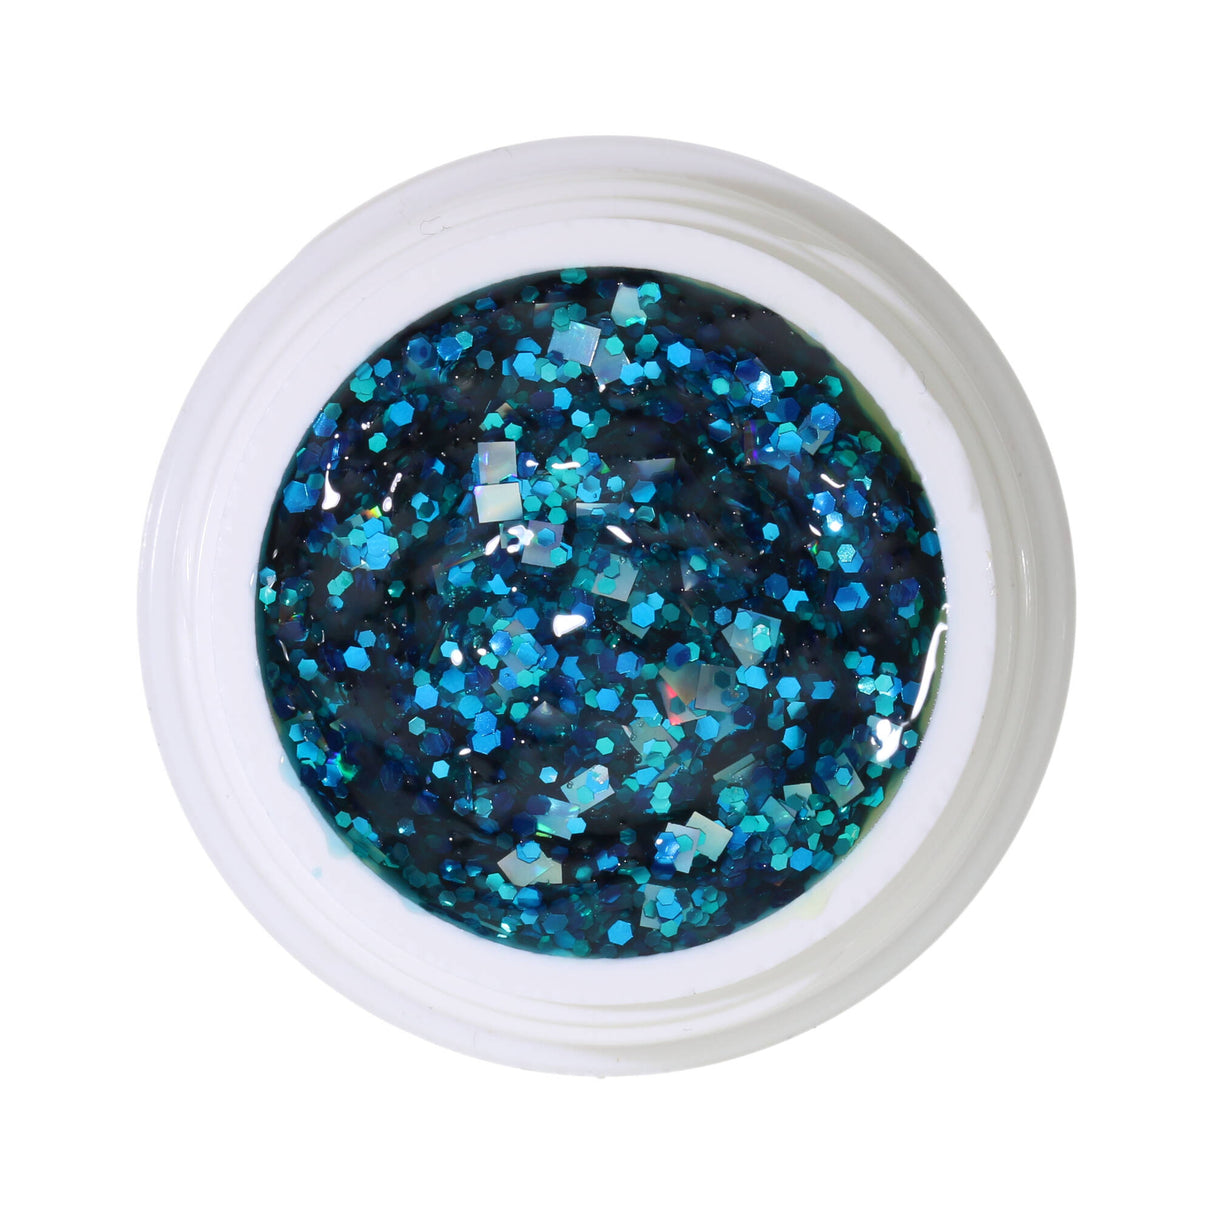 # 380 Premium-GLITTER Color Gel 5ml Silver glitter gel with turquoise accents